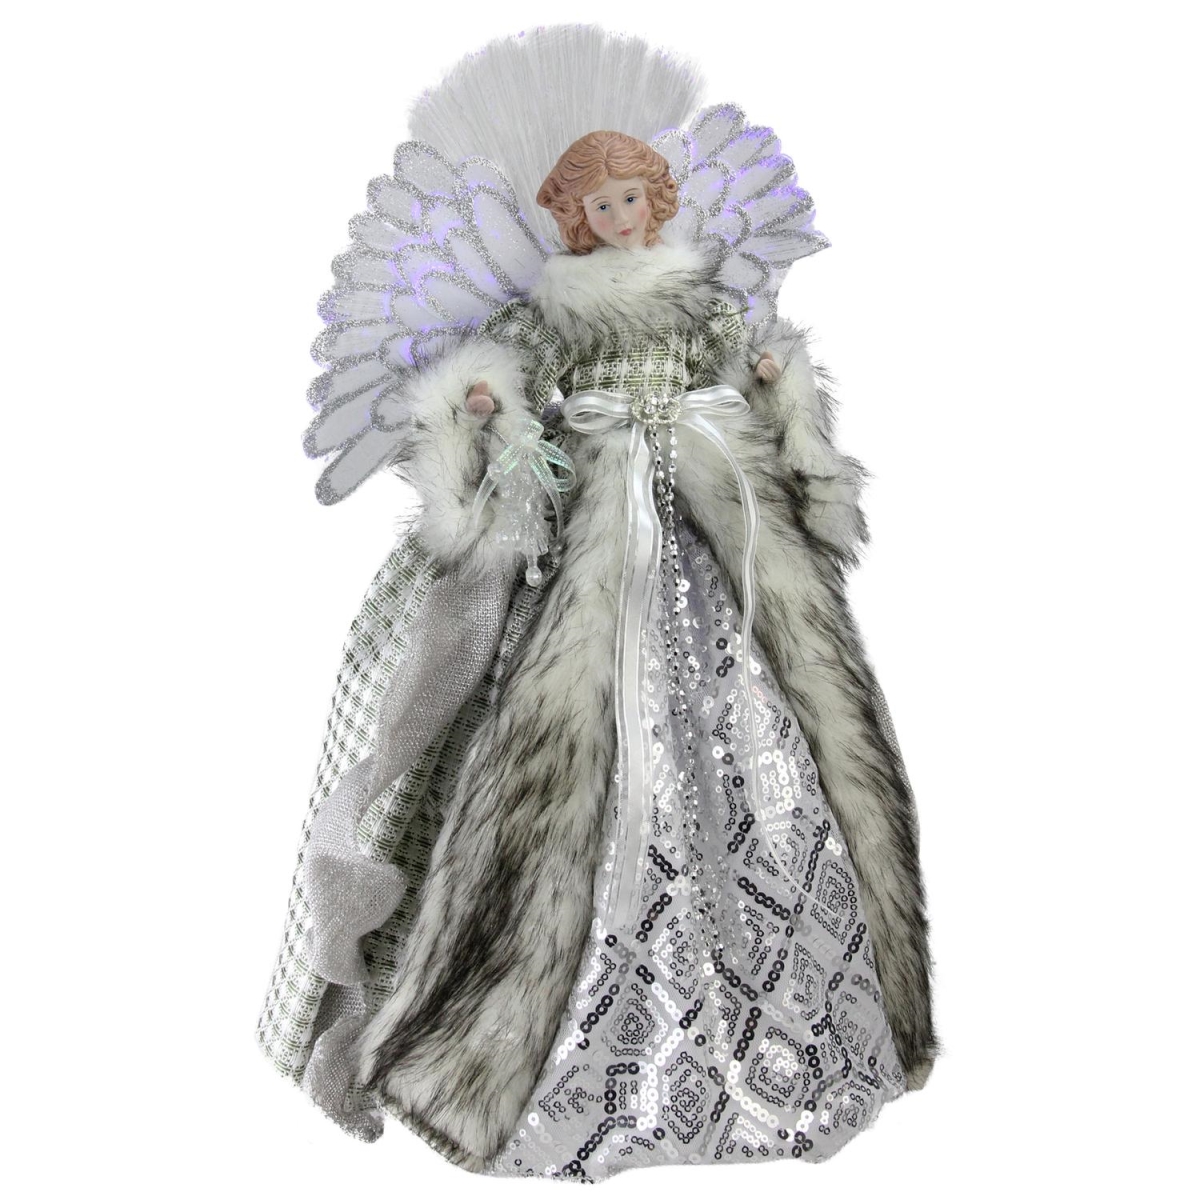 Picture of Northlight 32623769 16 in. Angel in Sequined Gown Christmas Tree Topper, Silver Gingham Coat